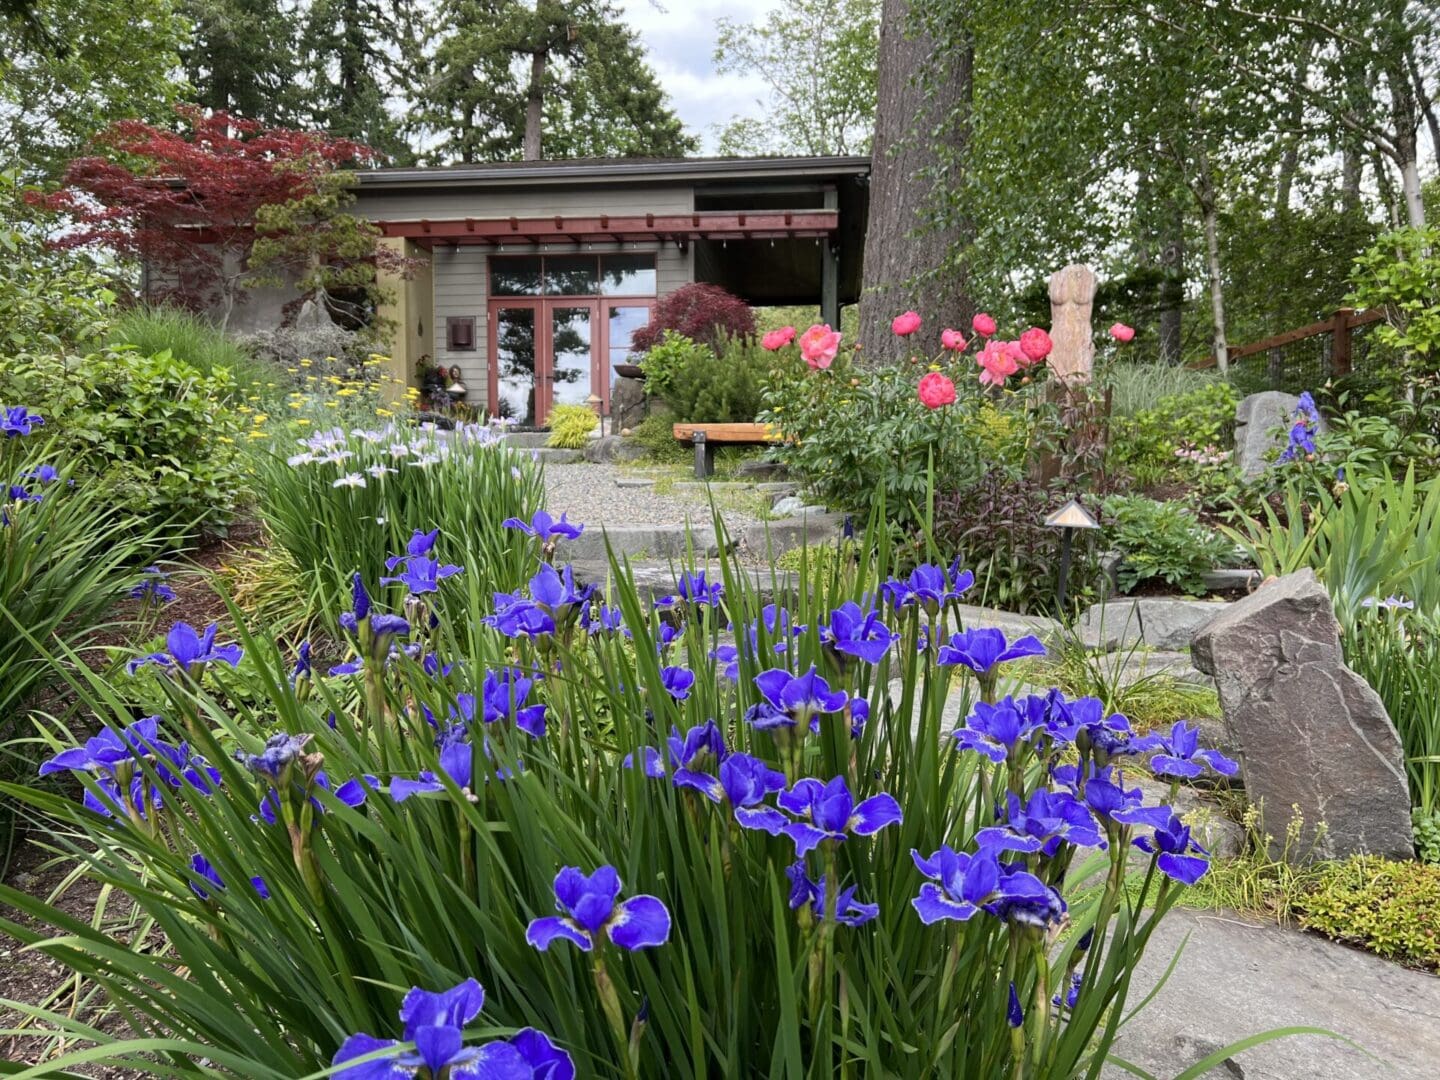 A garden with purple flowers and trees in the background.